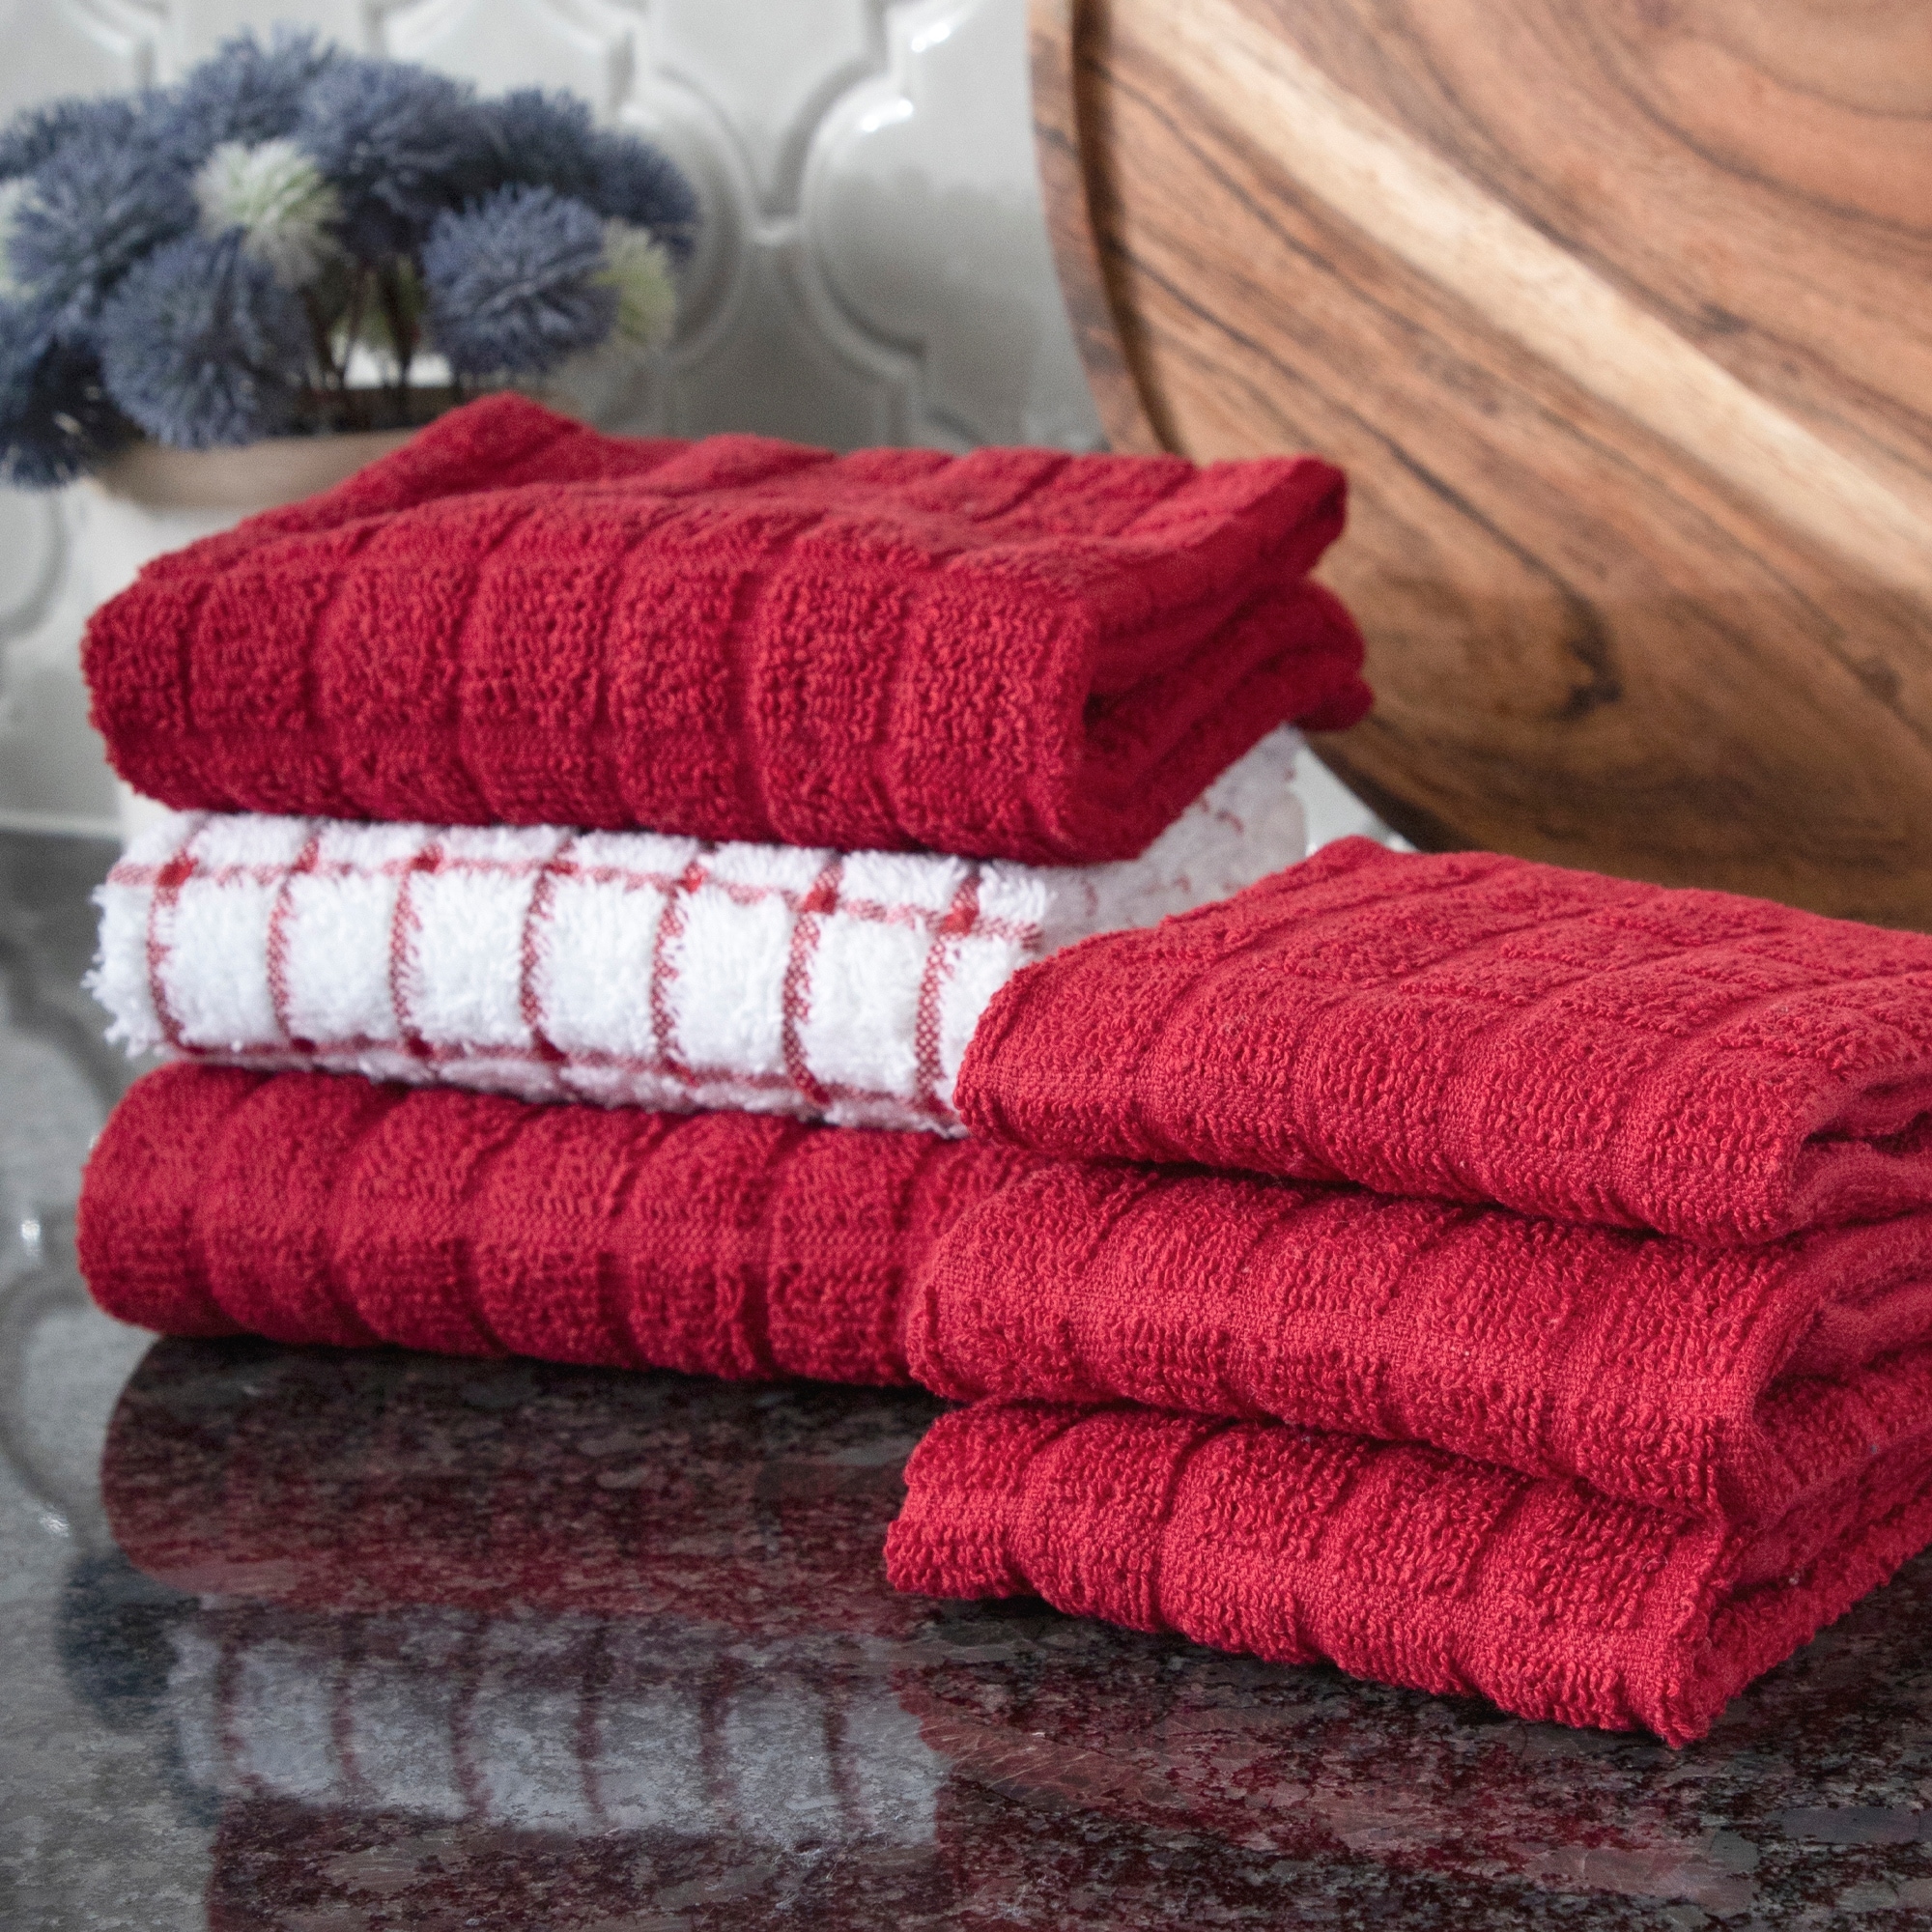 https://ak1.ostkcdn.com/images/products/is/images/direct/5aaacc58f29057931f3896b9aa05b4f7795ee4b0/RITZ-Terry-Kitchen-Towel-and-Dish-Cloth%2C-Set-of-3-Towels-and-3-Dish-Cloths.jpg